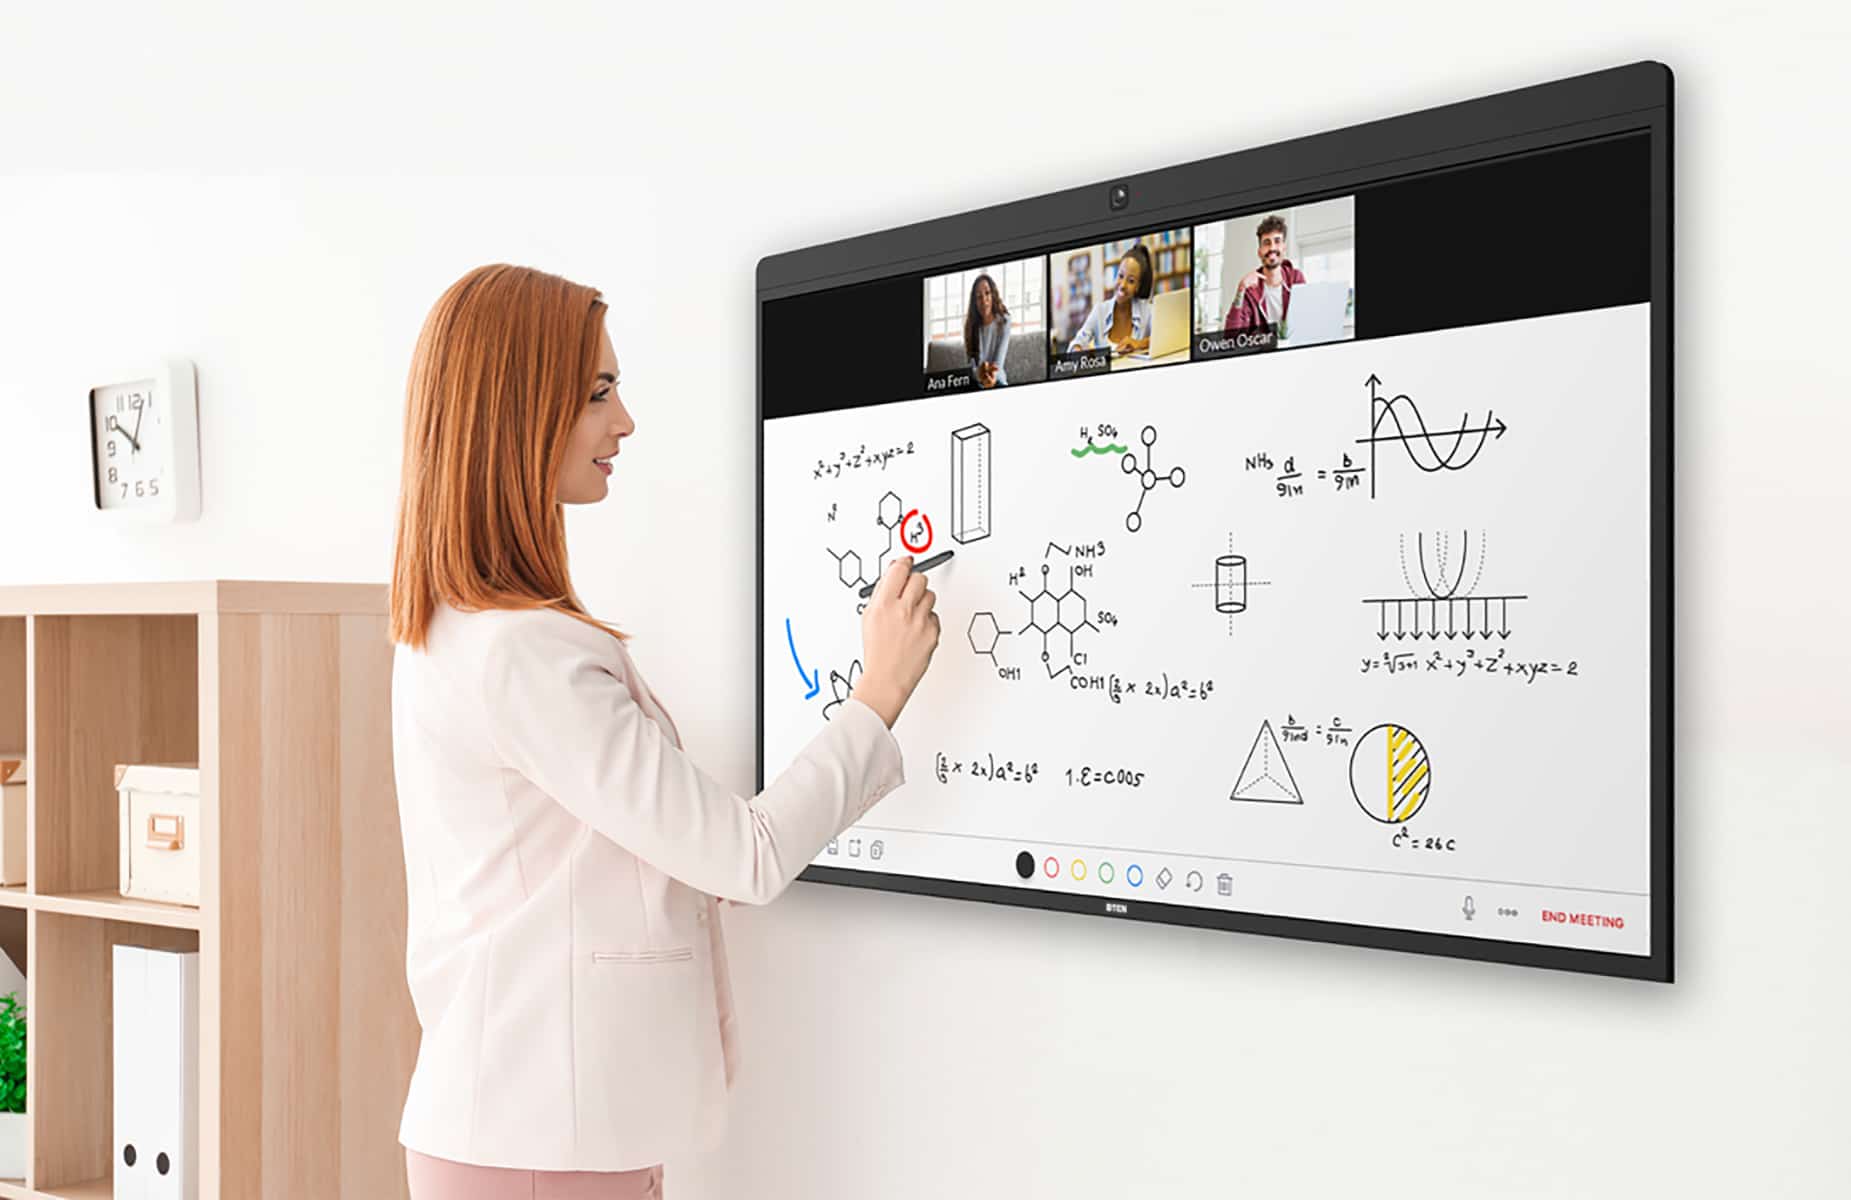 Remote Learning with Virtual Classrooms